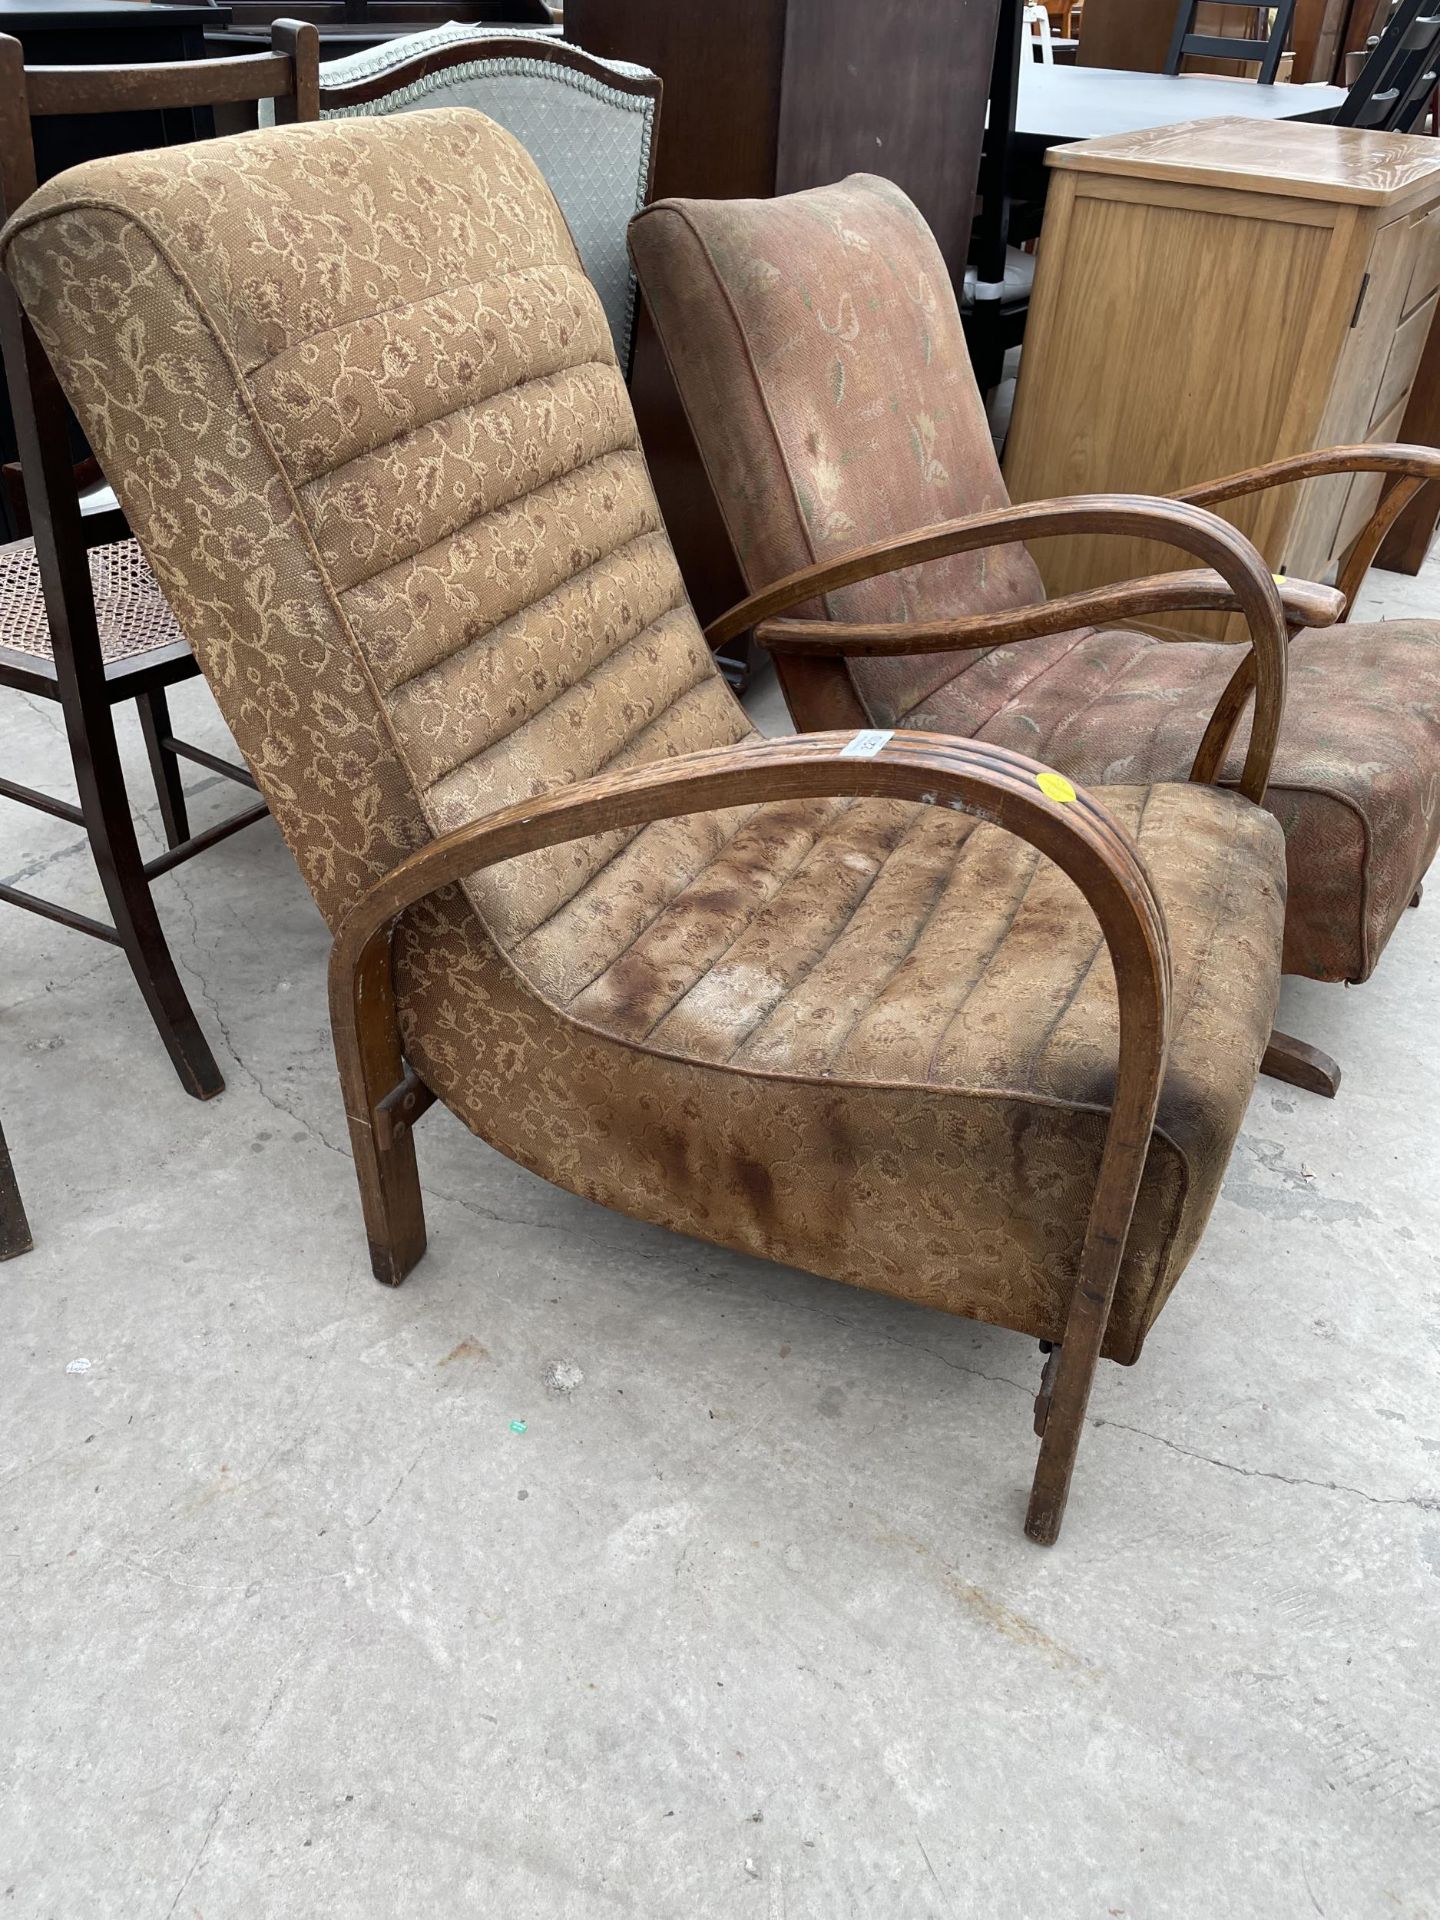 AN ART DECO FIRESIDE CHAIR AND SIMILAR ROCKING CHAIR - Image 2 of 3